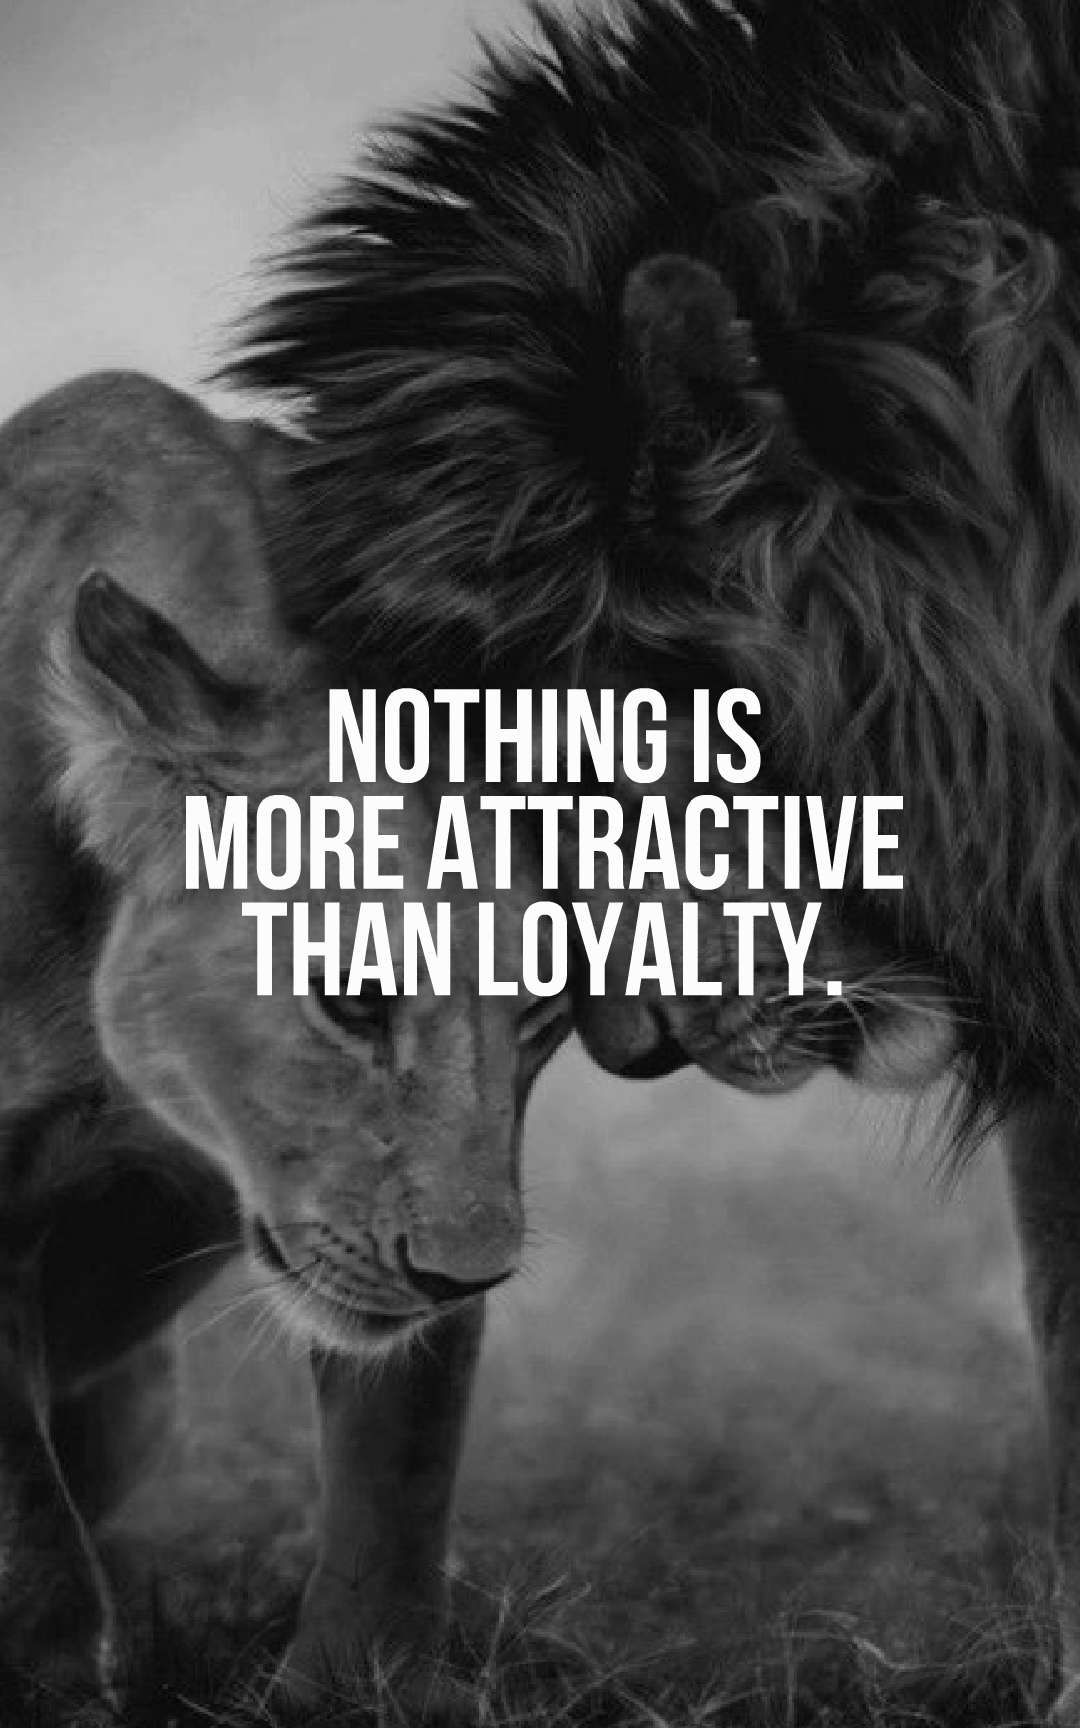 Nothing is more attractive than loyalty.